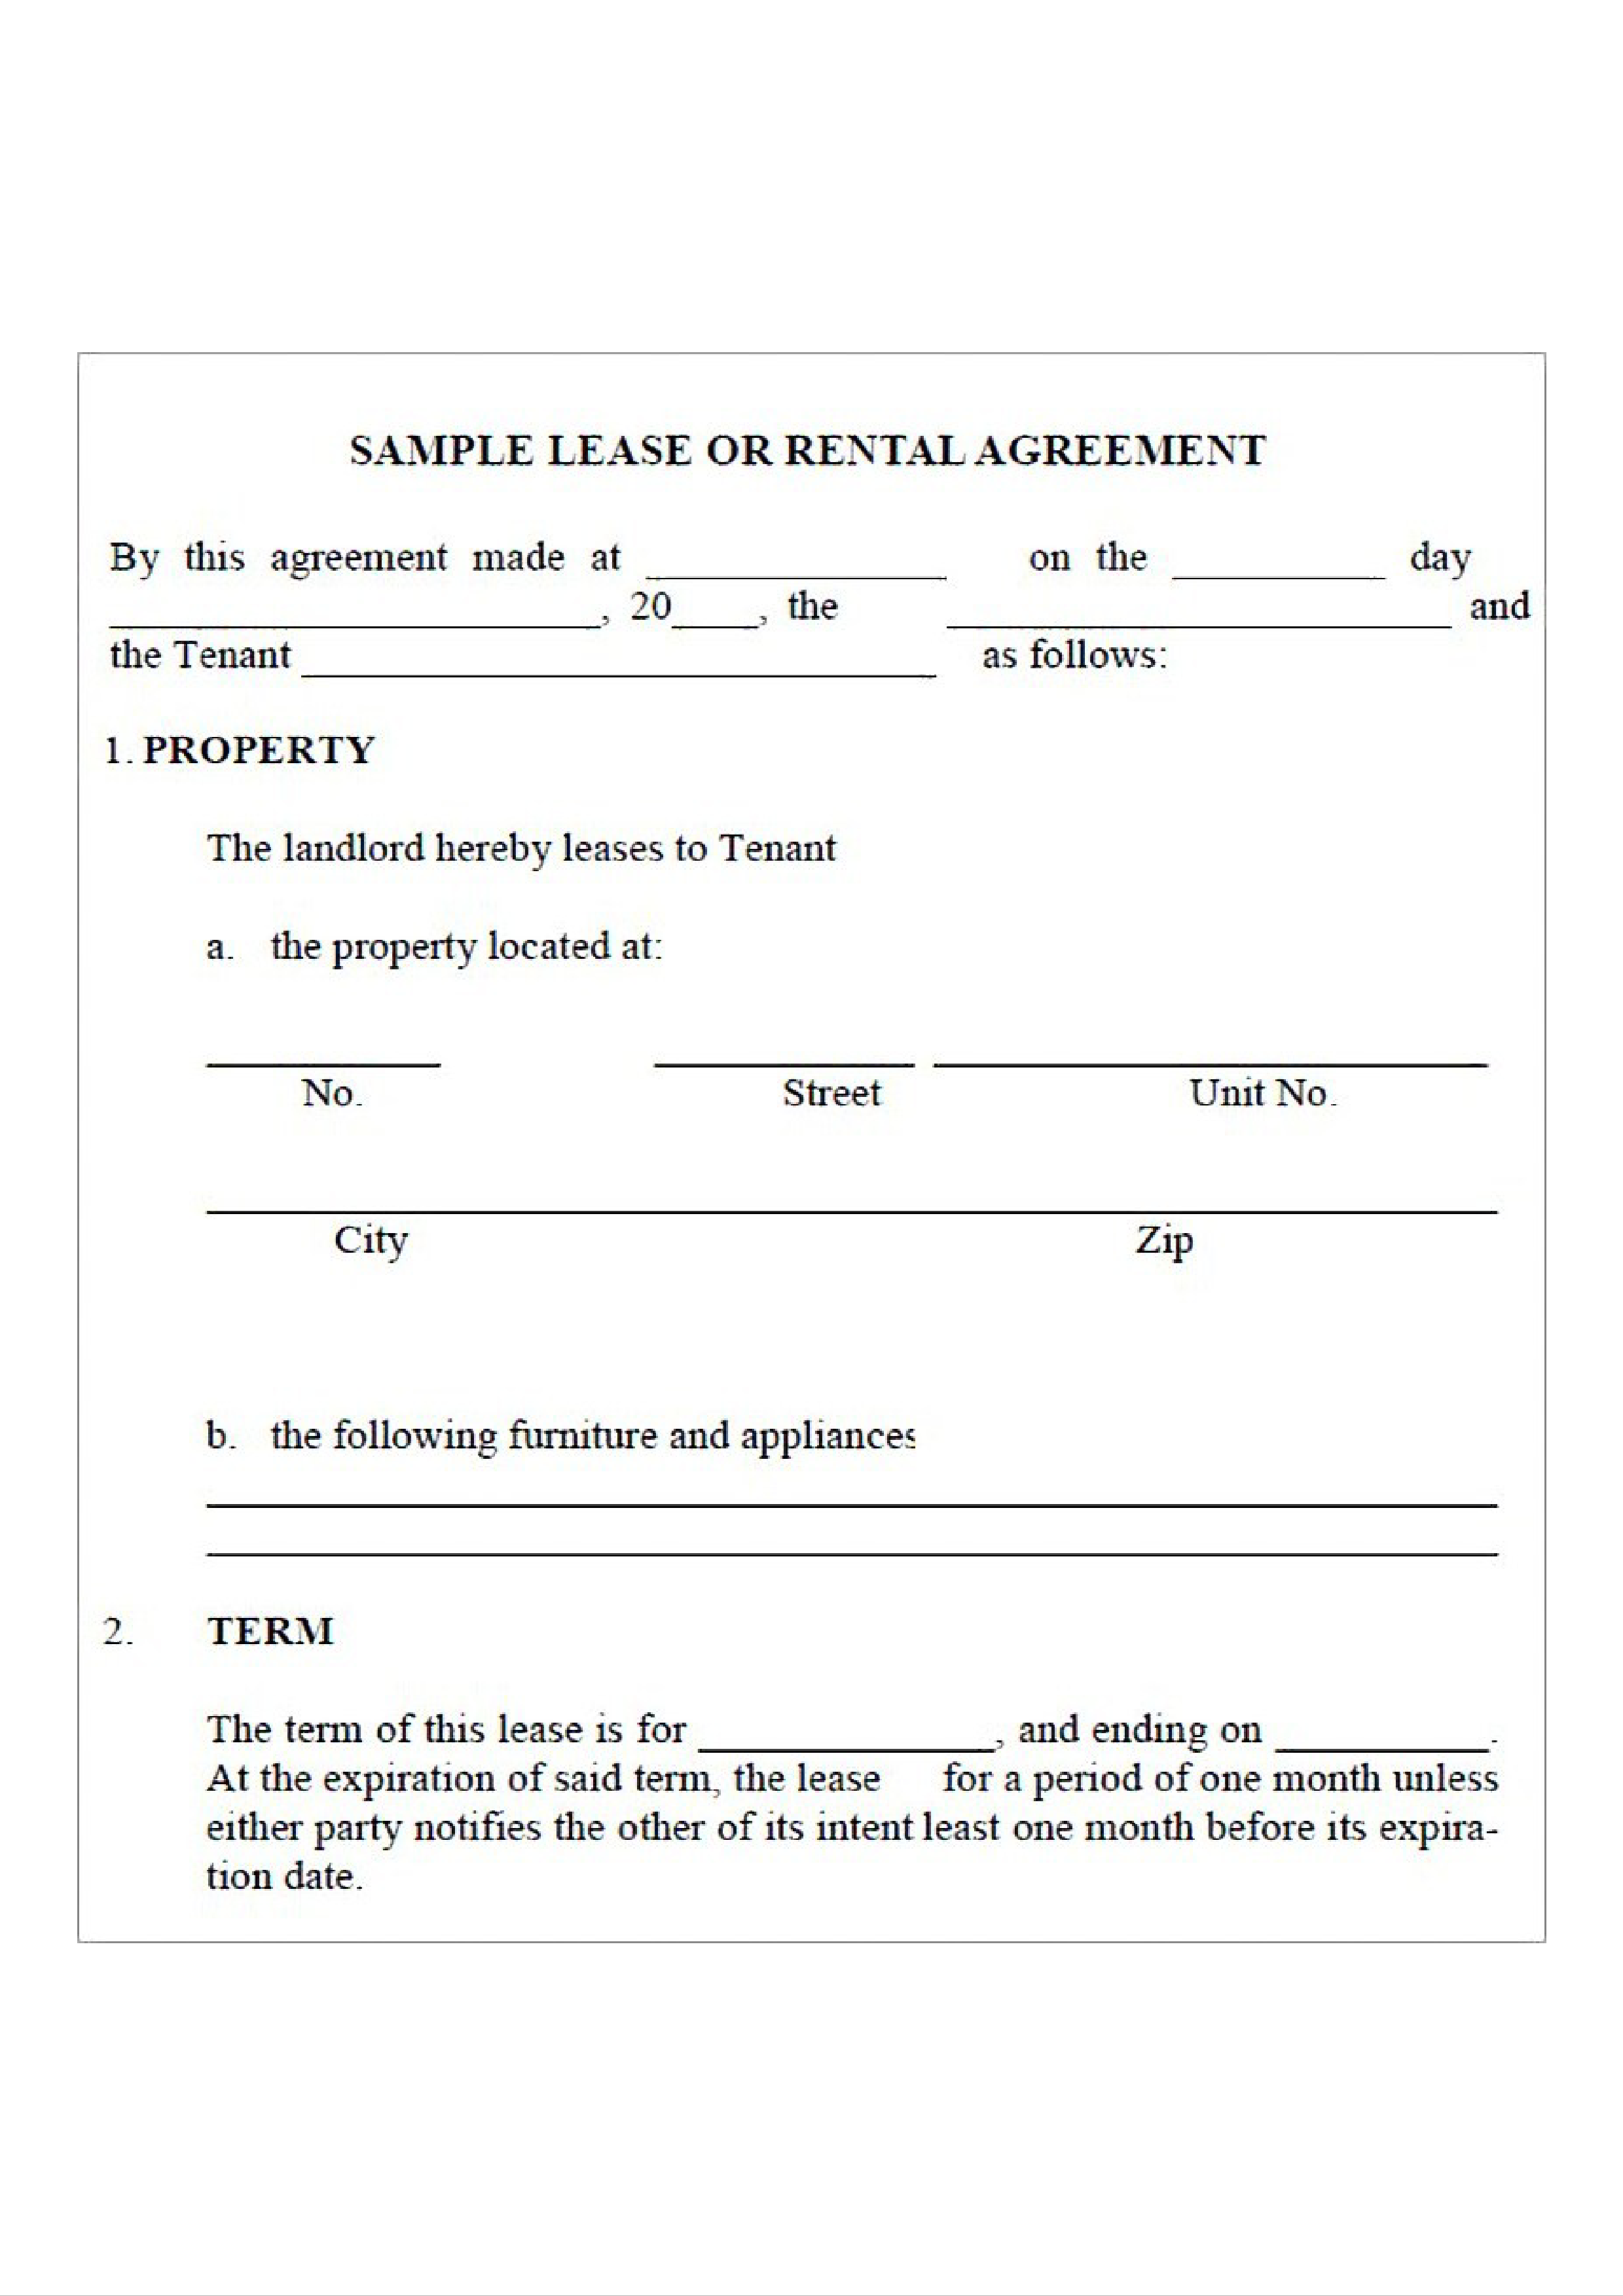 Rental Agreement For Business Lease Templates At Allbusinesstemplates